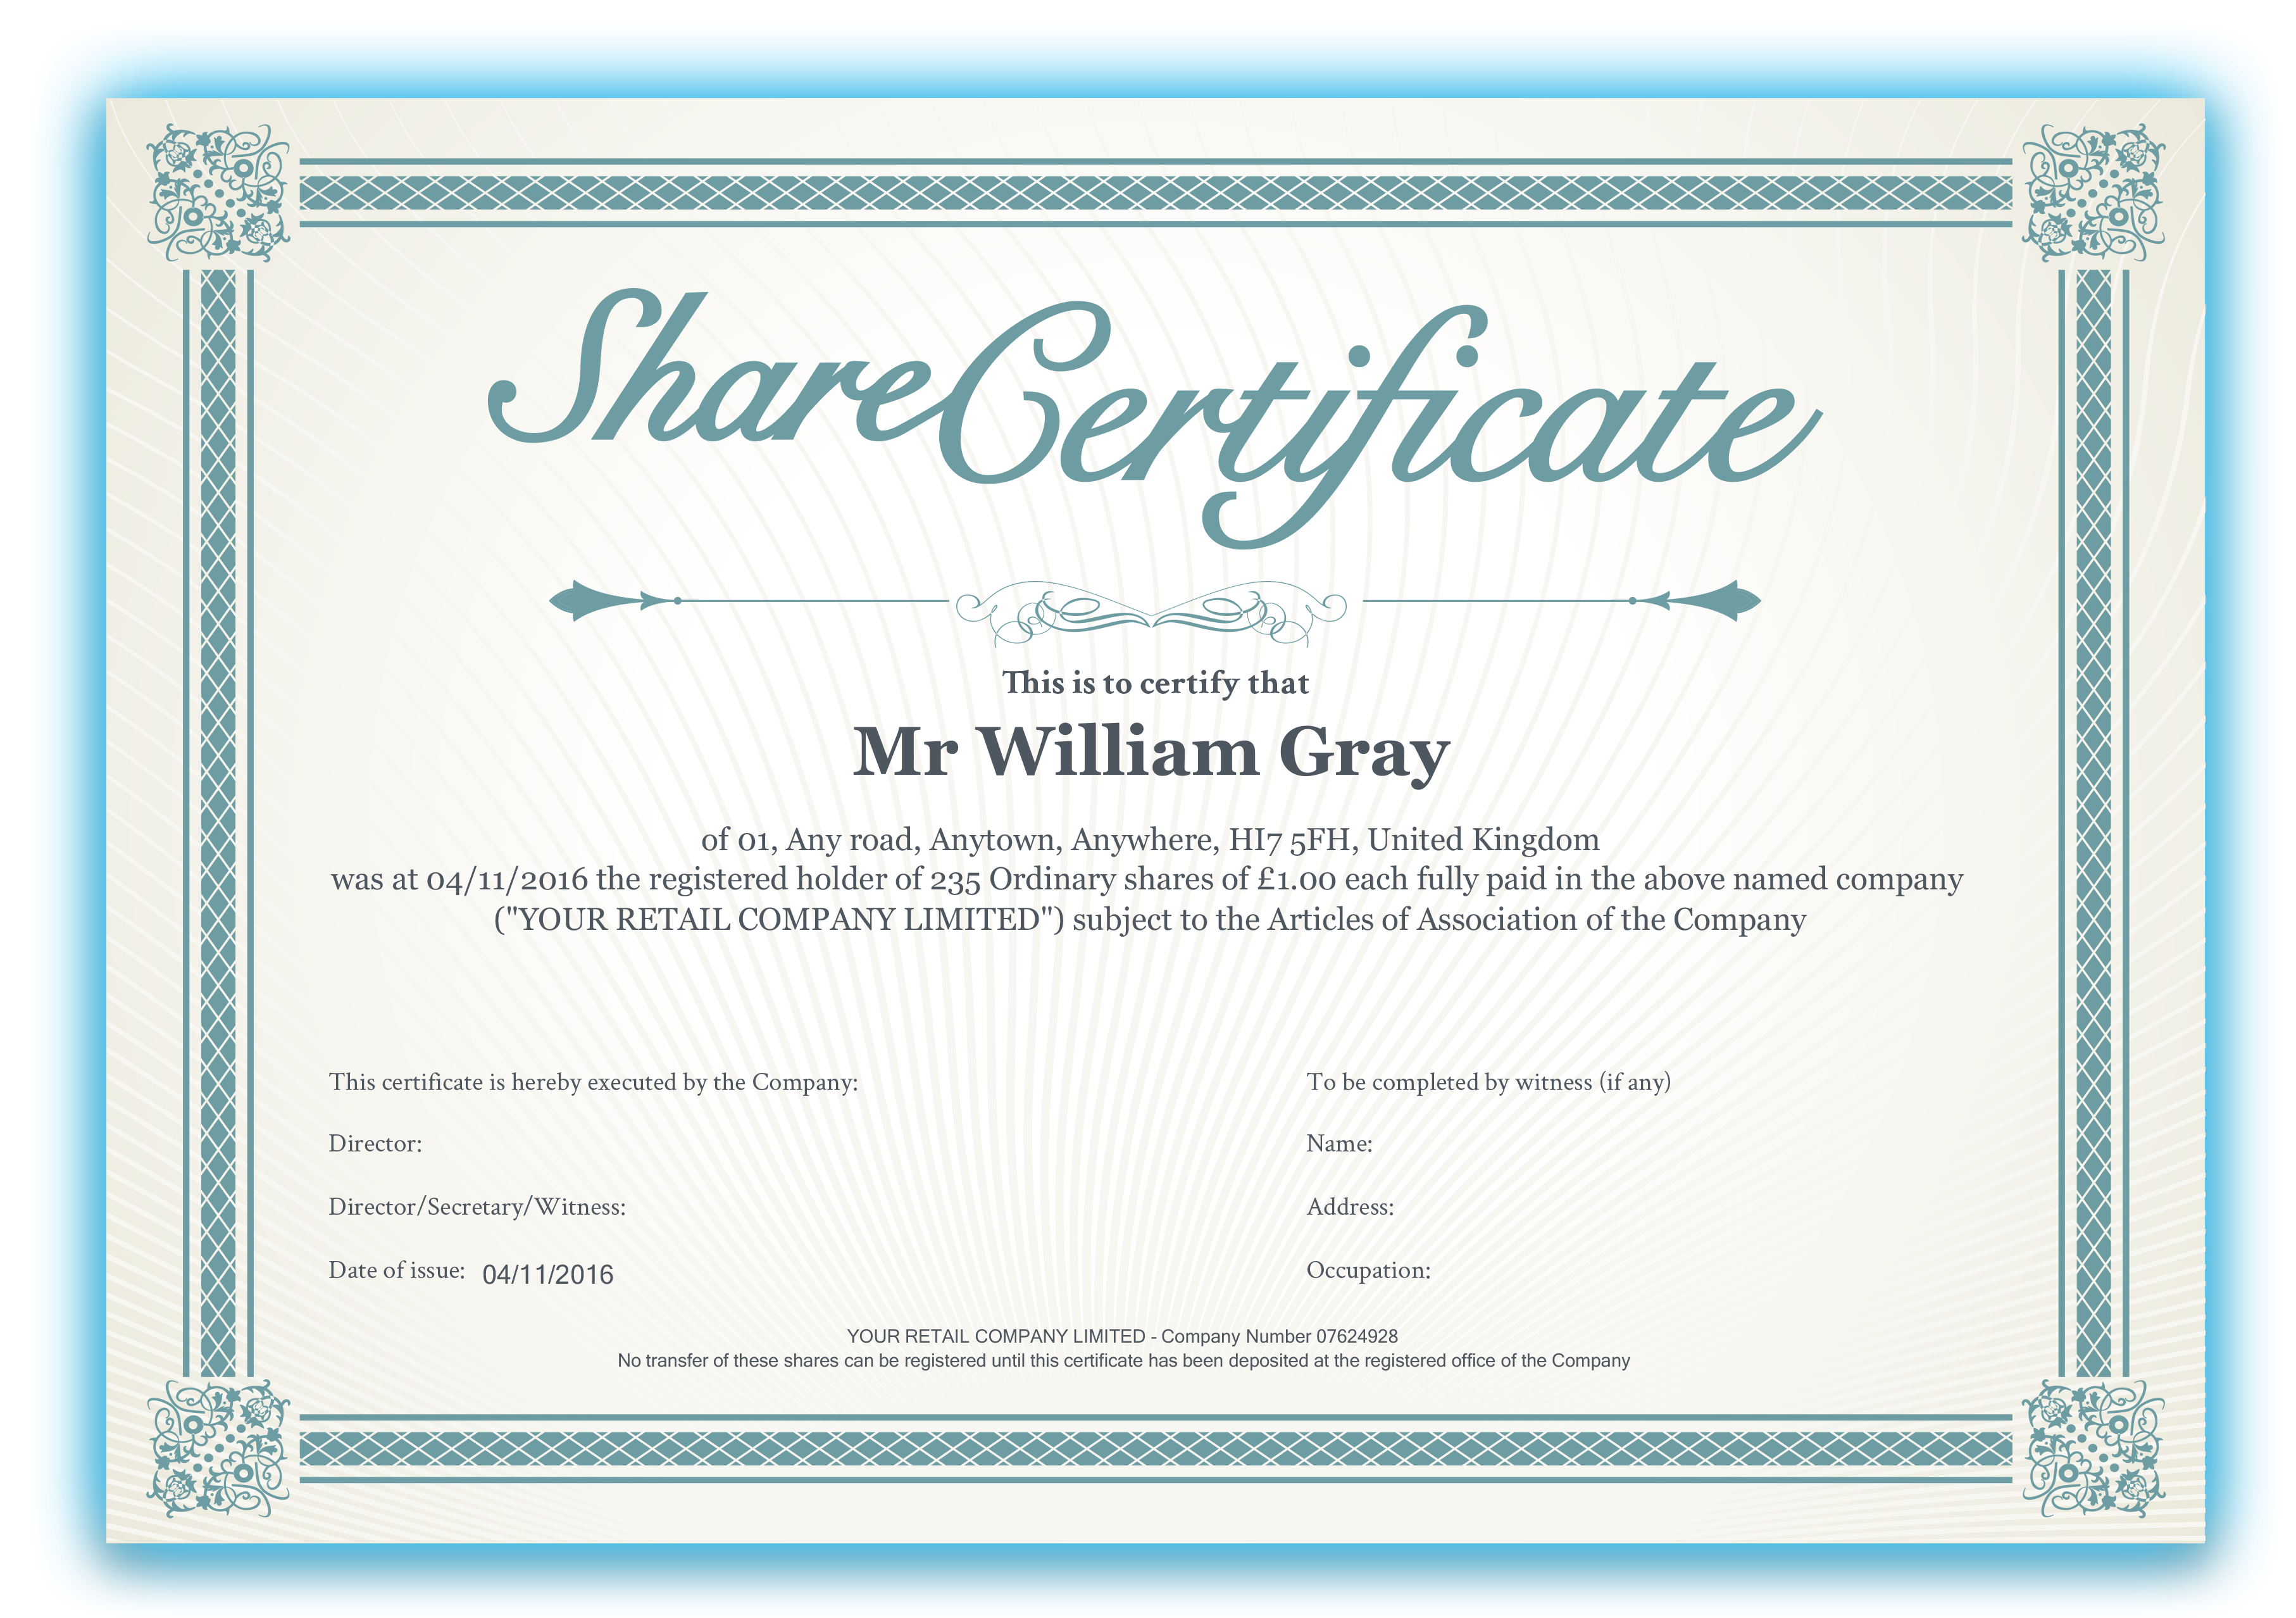 How Do I Add a Logo to the Share Certificate? : Inform Direct Support Within Template Of Share Certificate